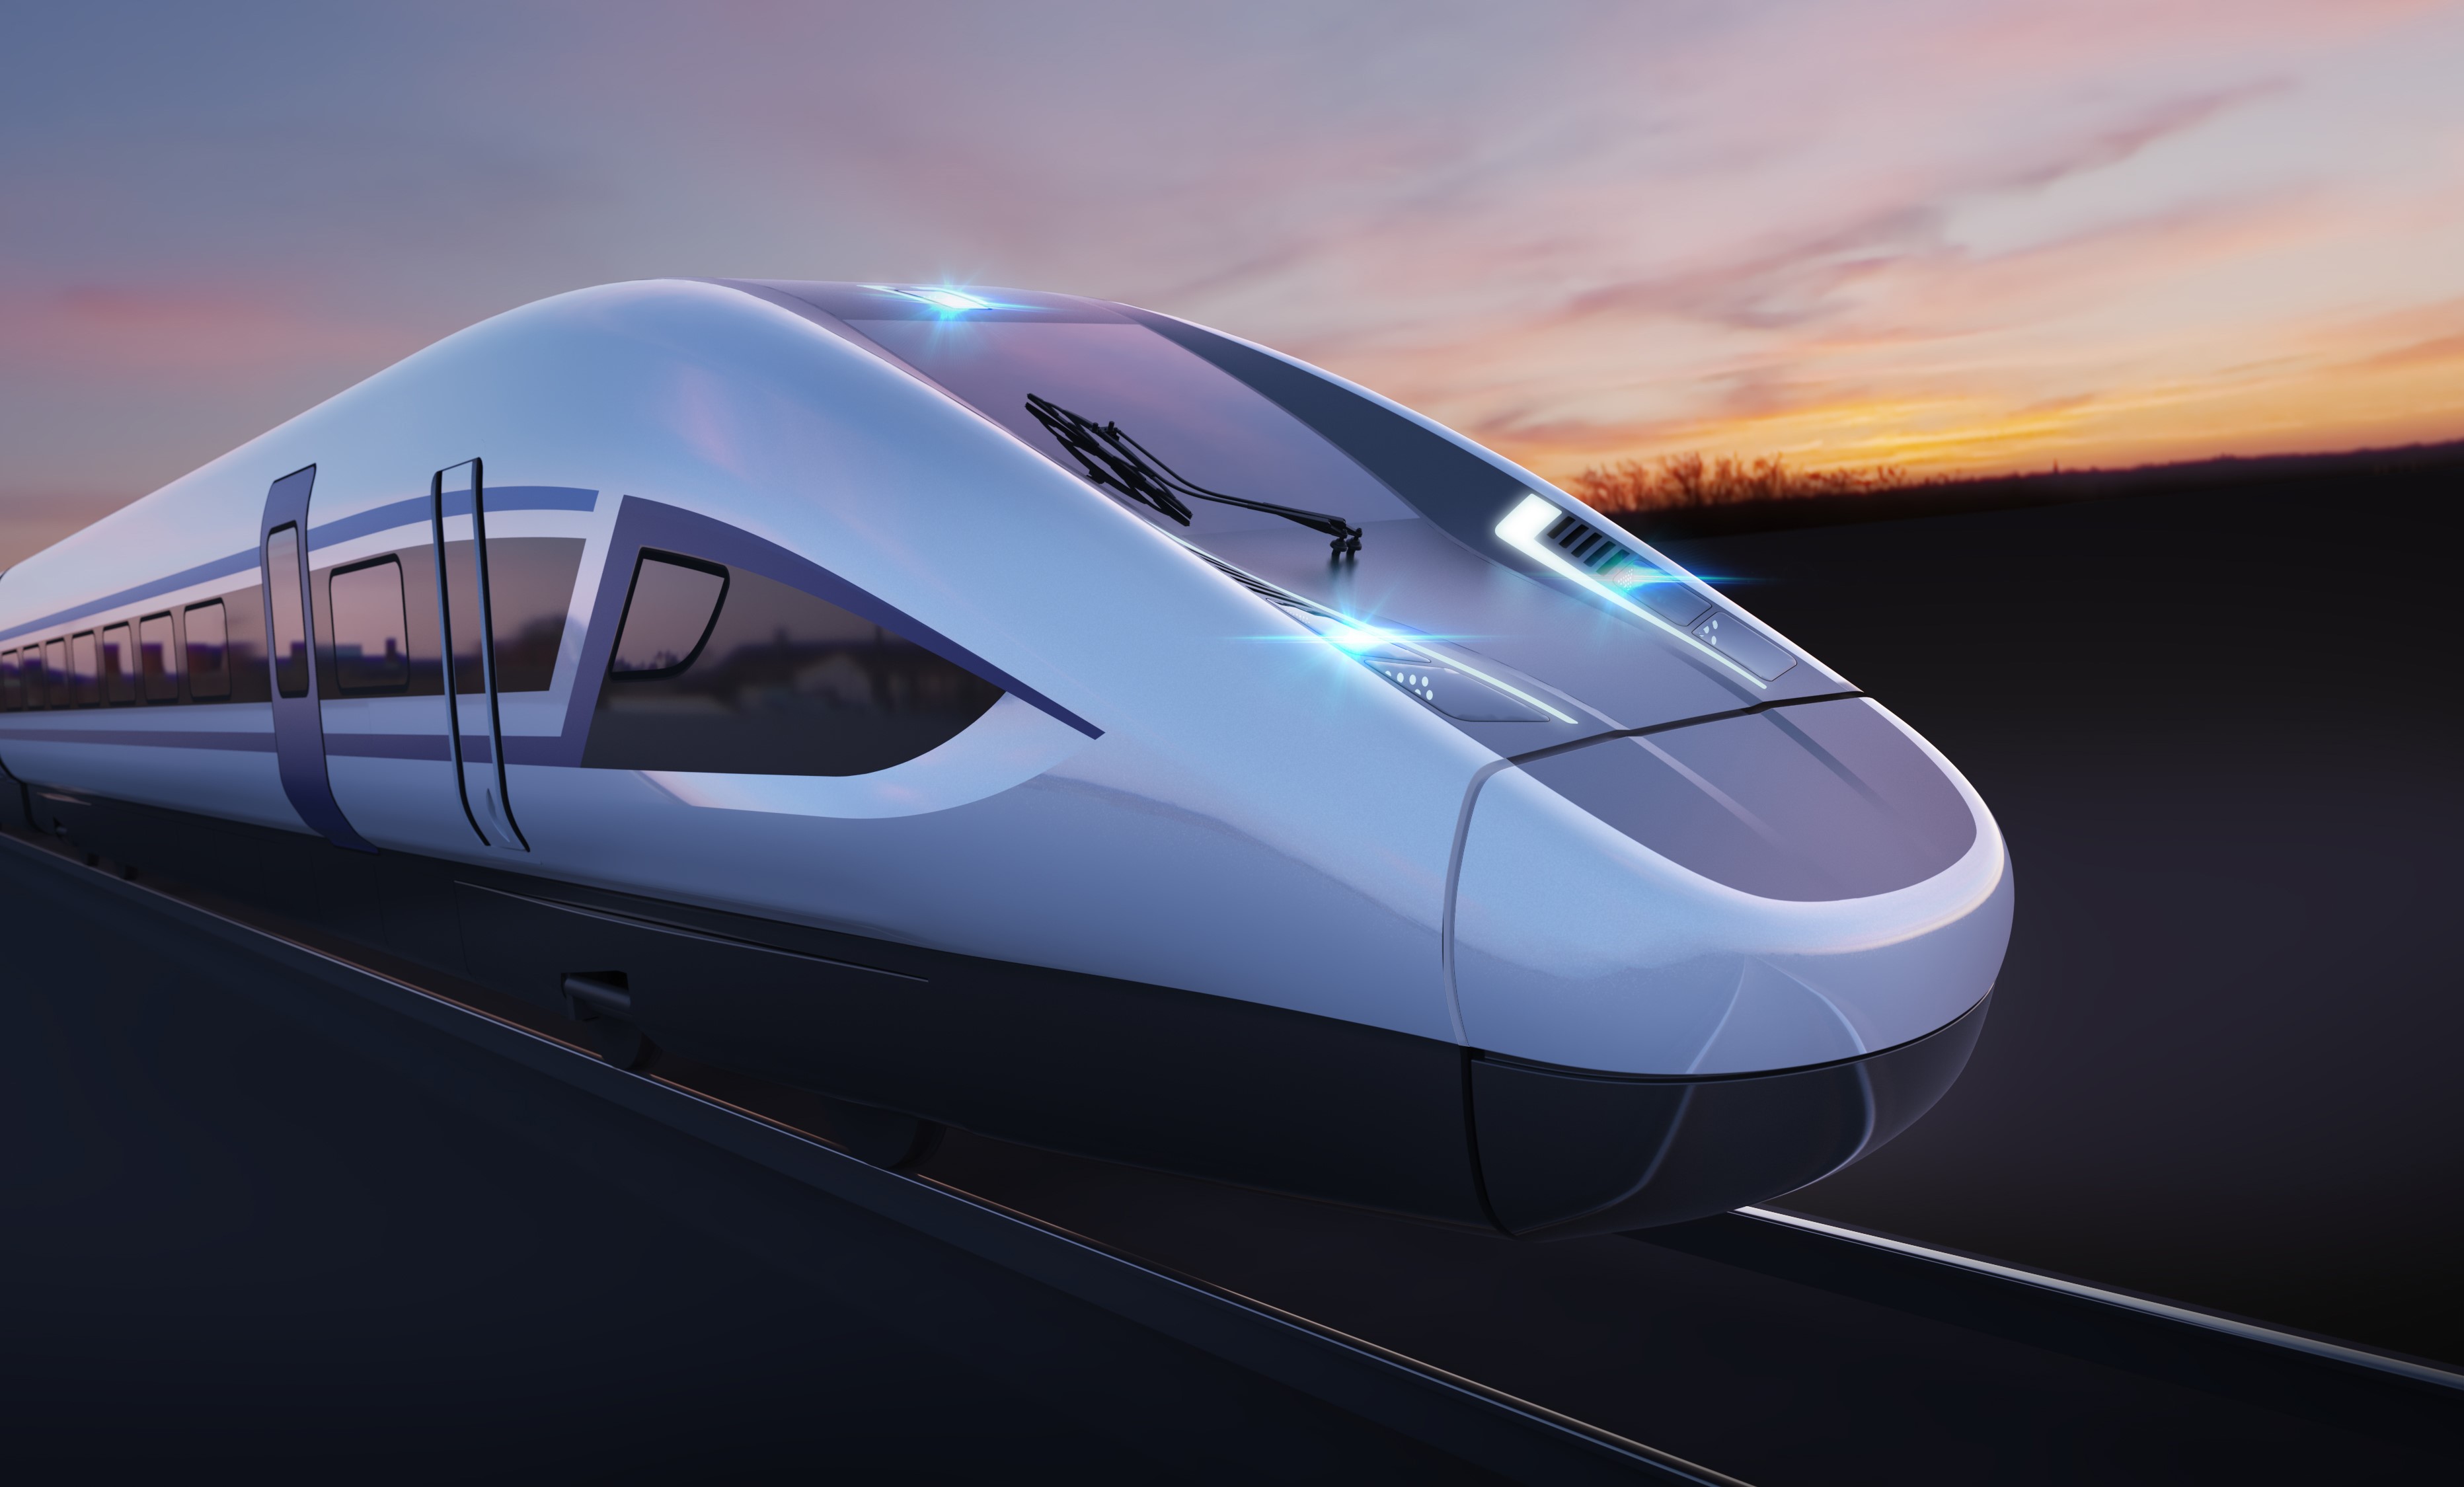 Siemens is among the firms to publish a design for HS2 trains (Siemens/PA)